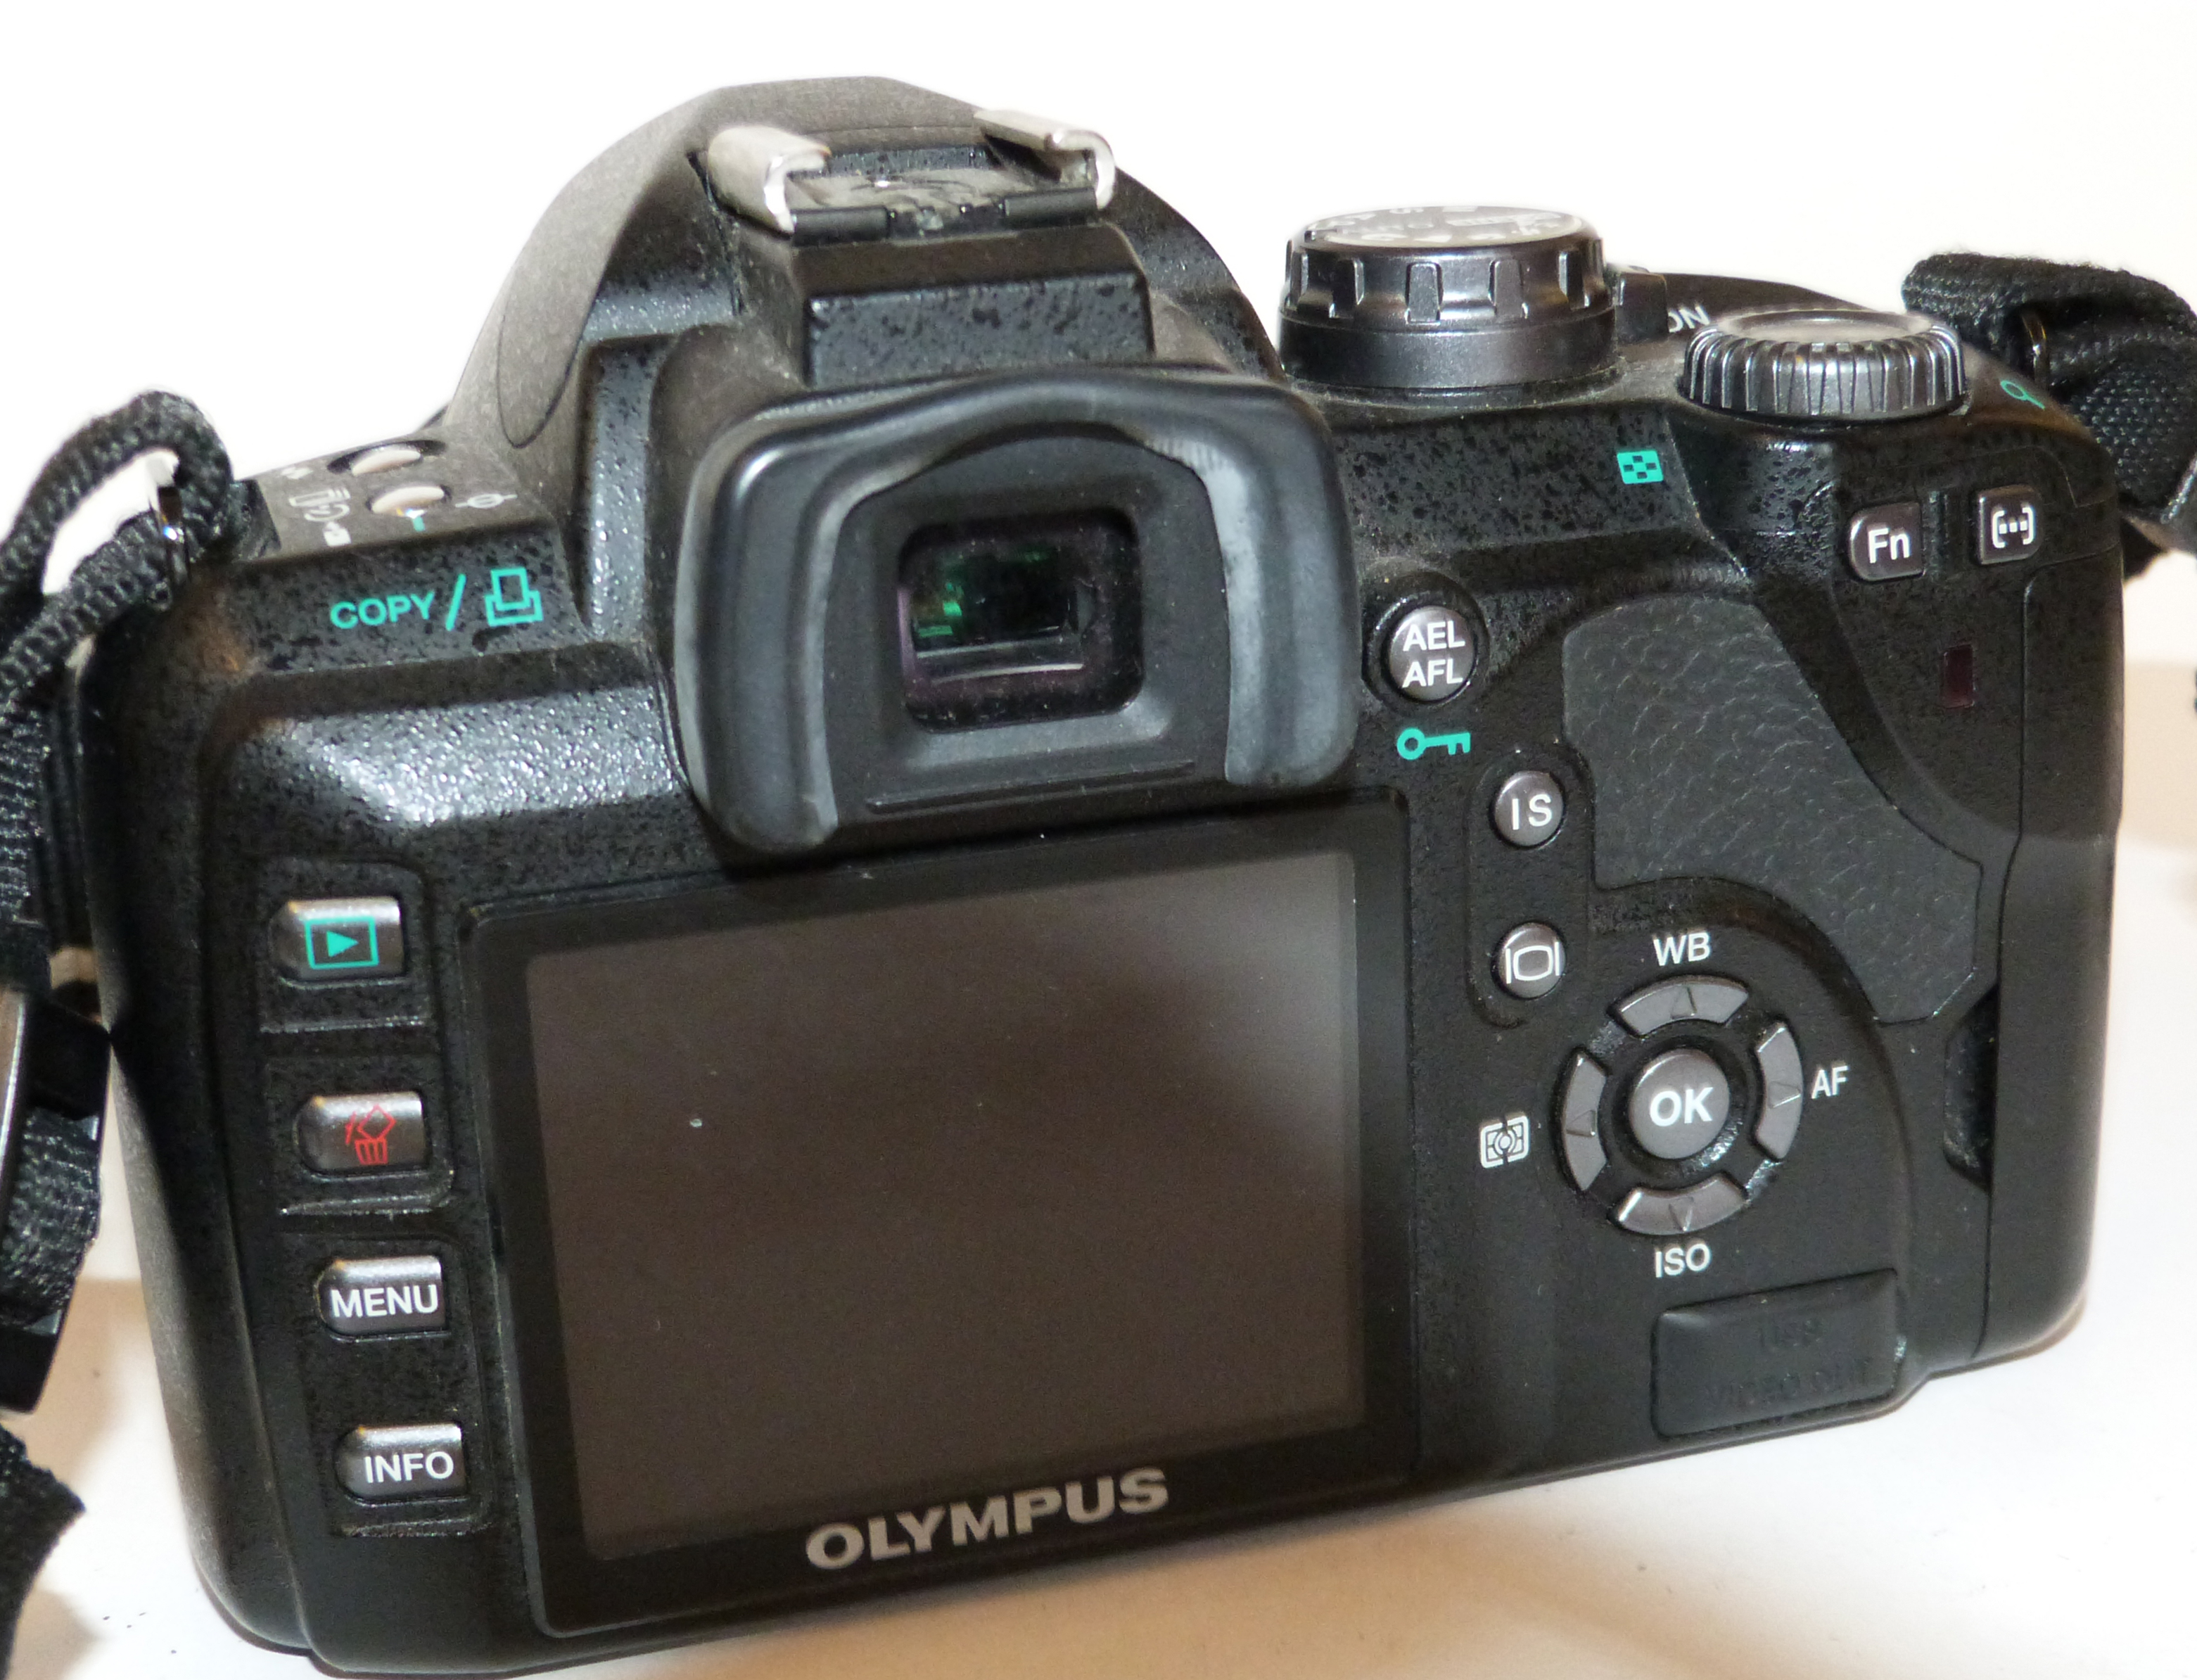 Olympus E-510 digital camera, together with Zuiko digital 14-42mm lens, charger and fitted case - Image 4 of 5